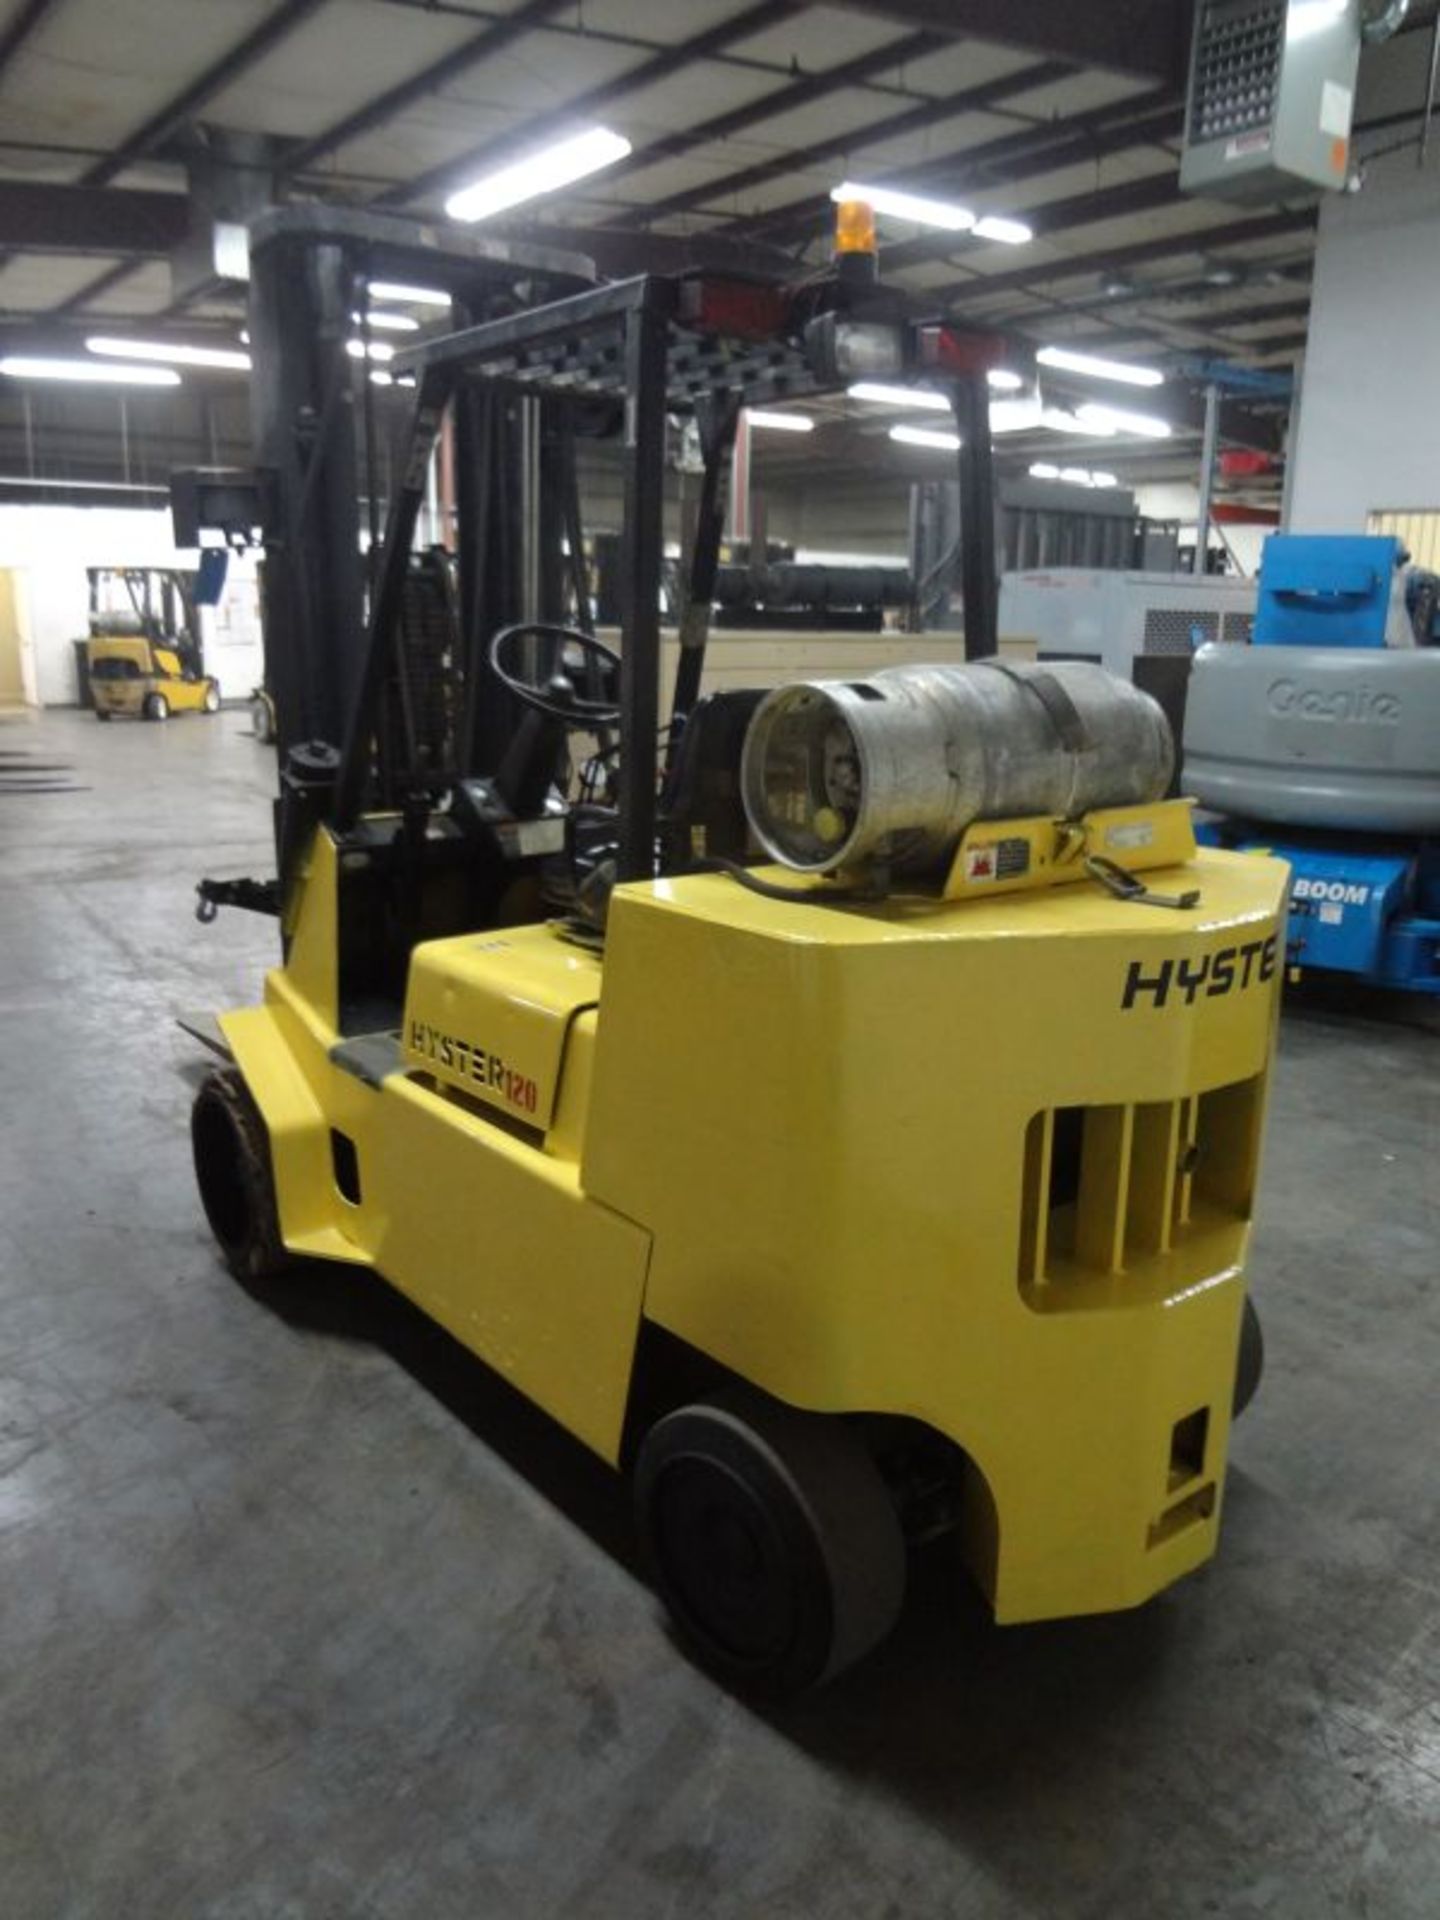 12,000 LB. HYSTER MODEL S120XLS CUSHION TIRE LP GAS LIFT TRUCK; S/N D004V09765S, 6,567 HOURS - Image 4 of 8